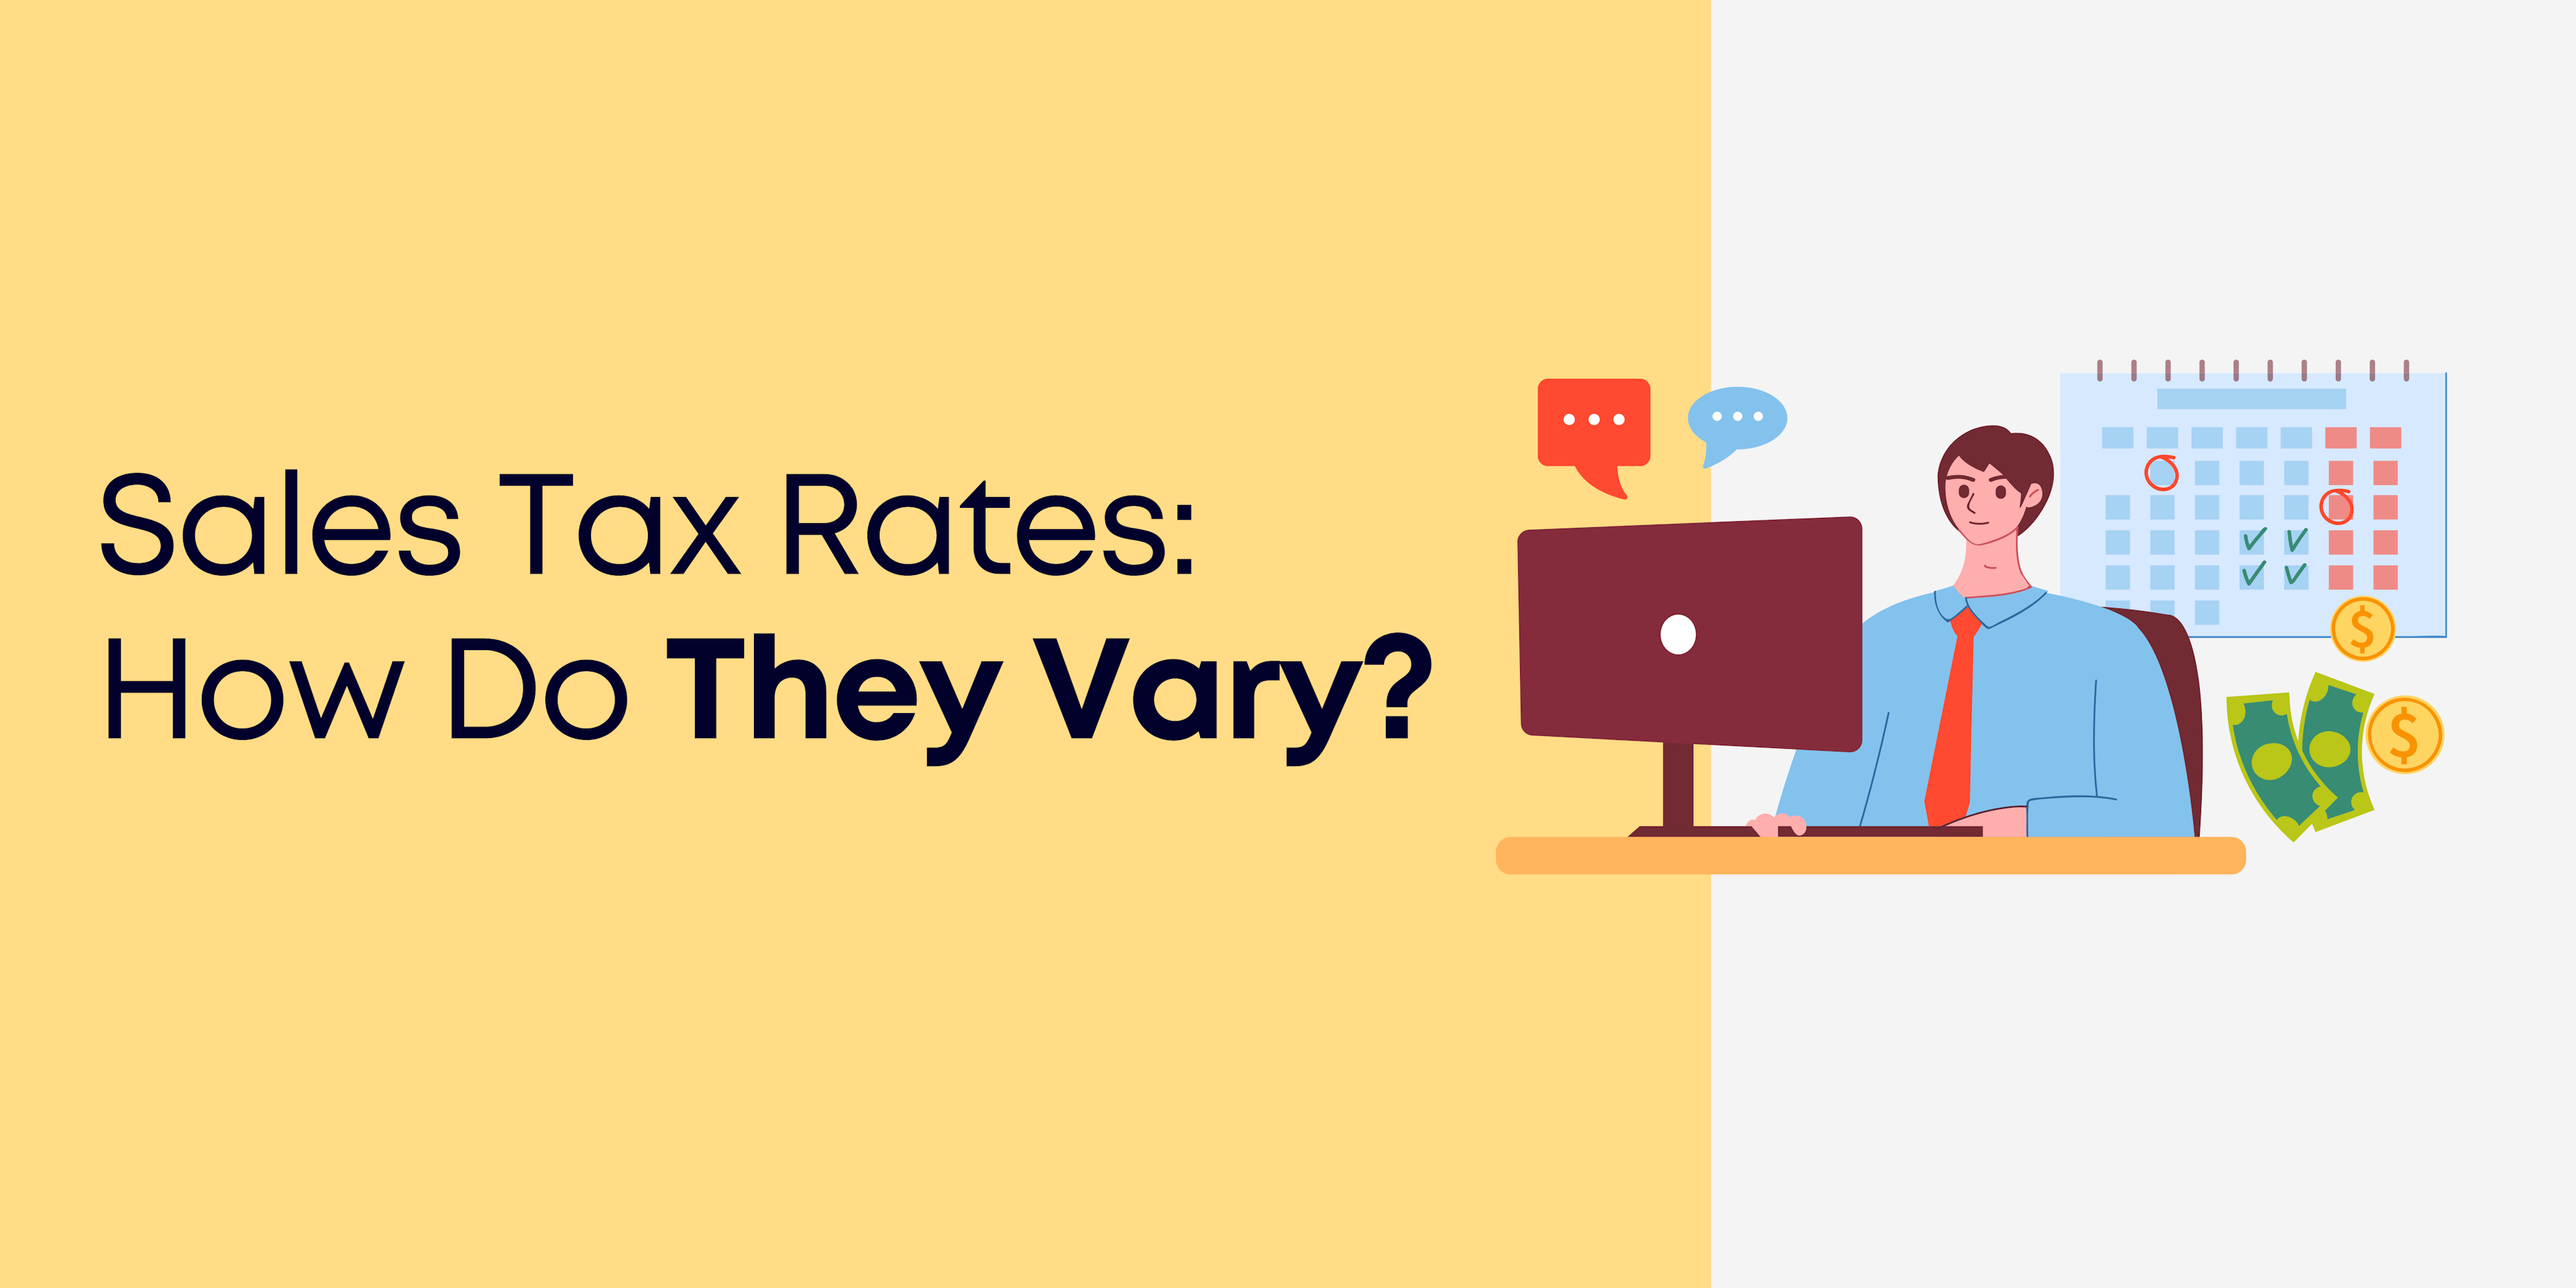 Sales Tax Rates: How Do They Vary